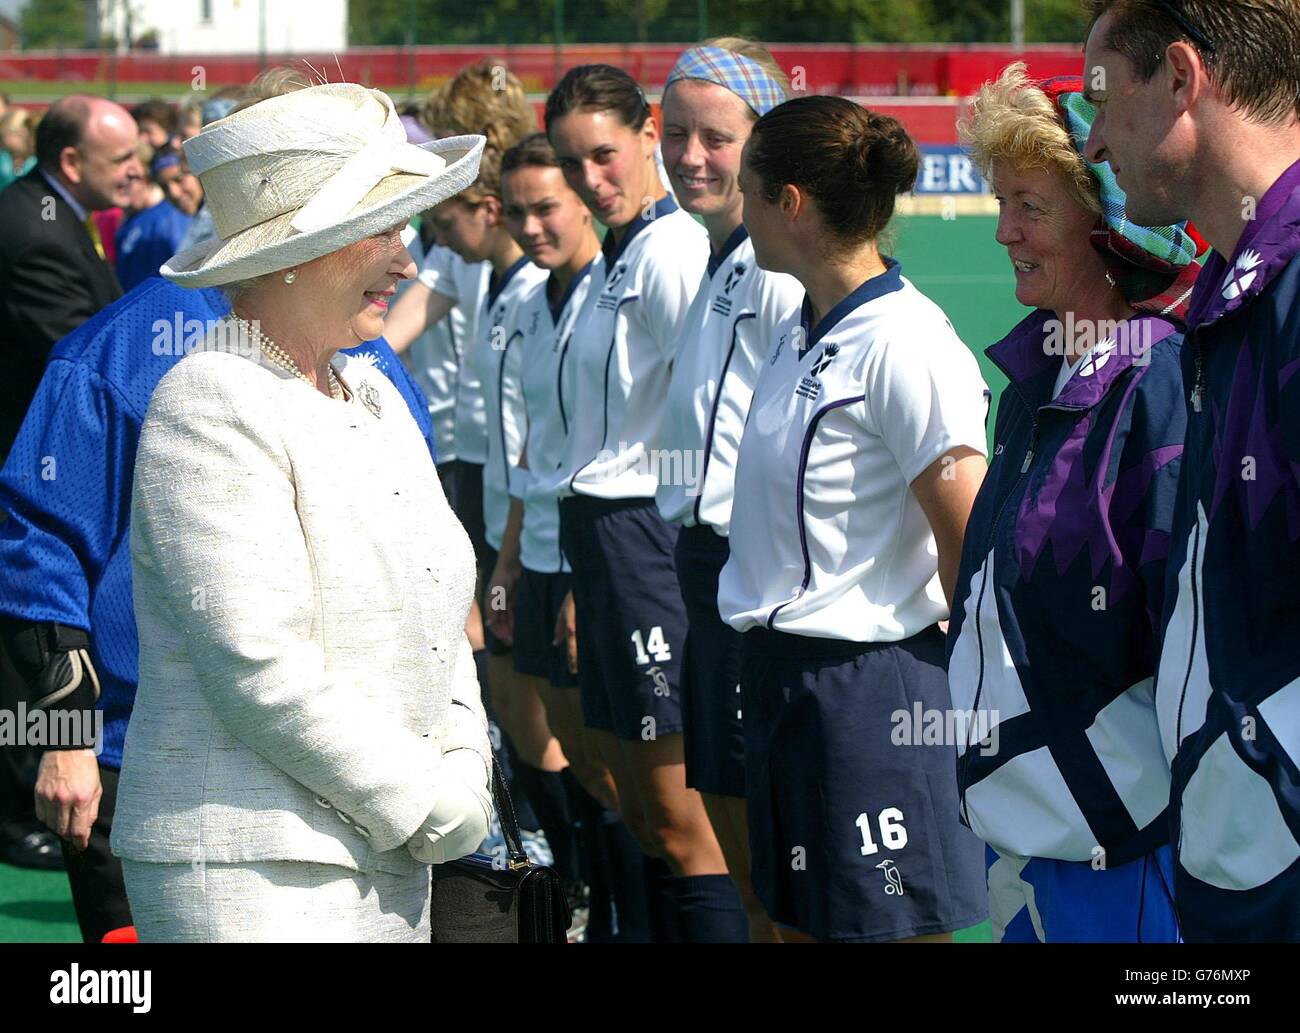 Britain's Queen Elizabeth II meets members of the Scotland ladies hockey team before their match against Australia, on the 1st day of the Commonwealth Games in Manchester. Stock Photo